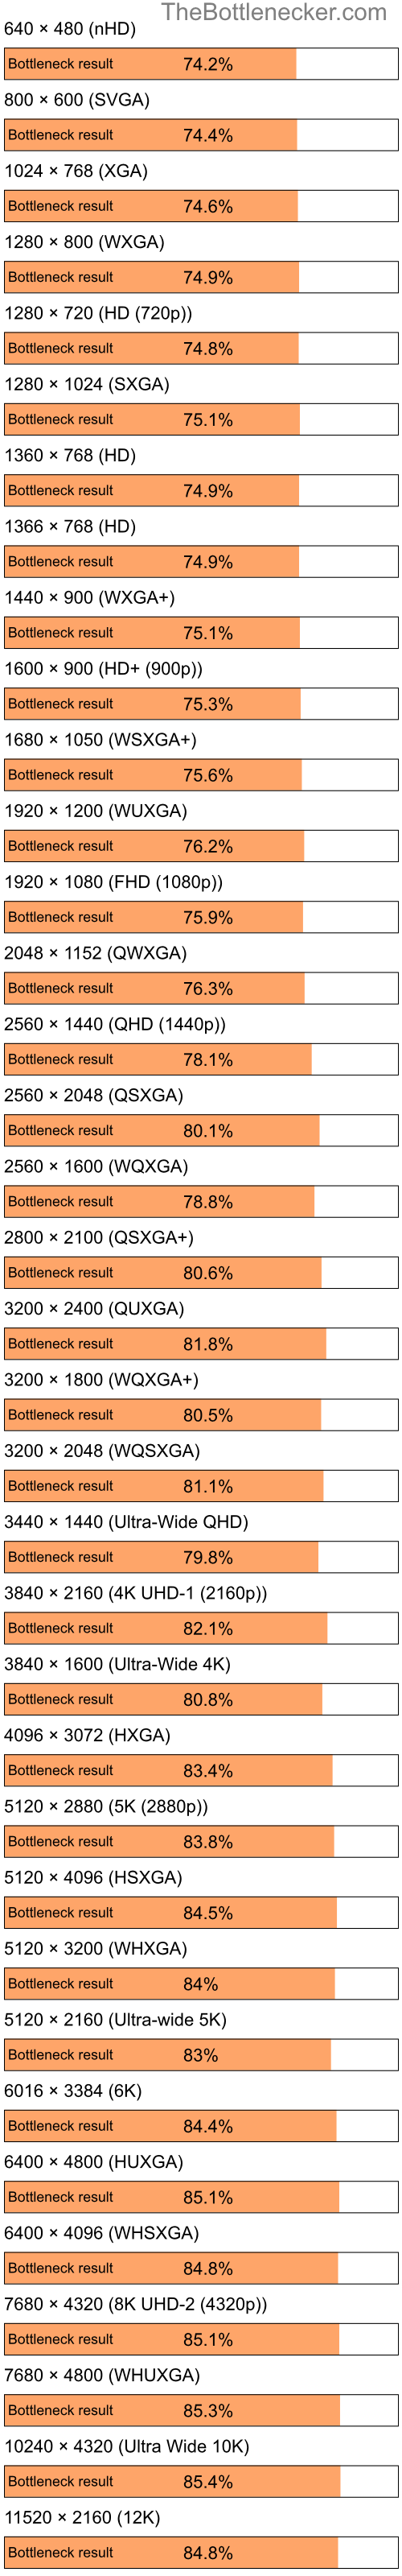 Bottleneck results by resolution for Intel Celeron M and NVIDIA GeForce 9100M G in Graphic Card Intense Tasks